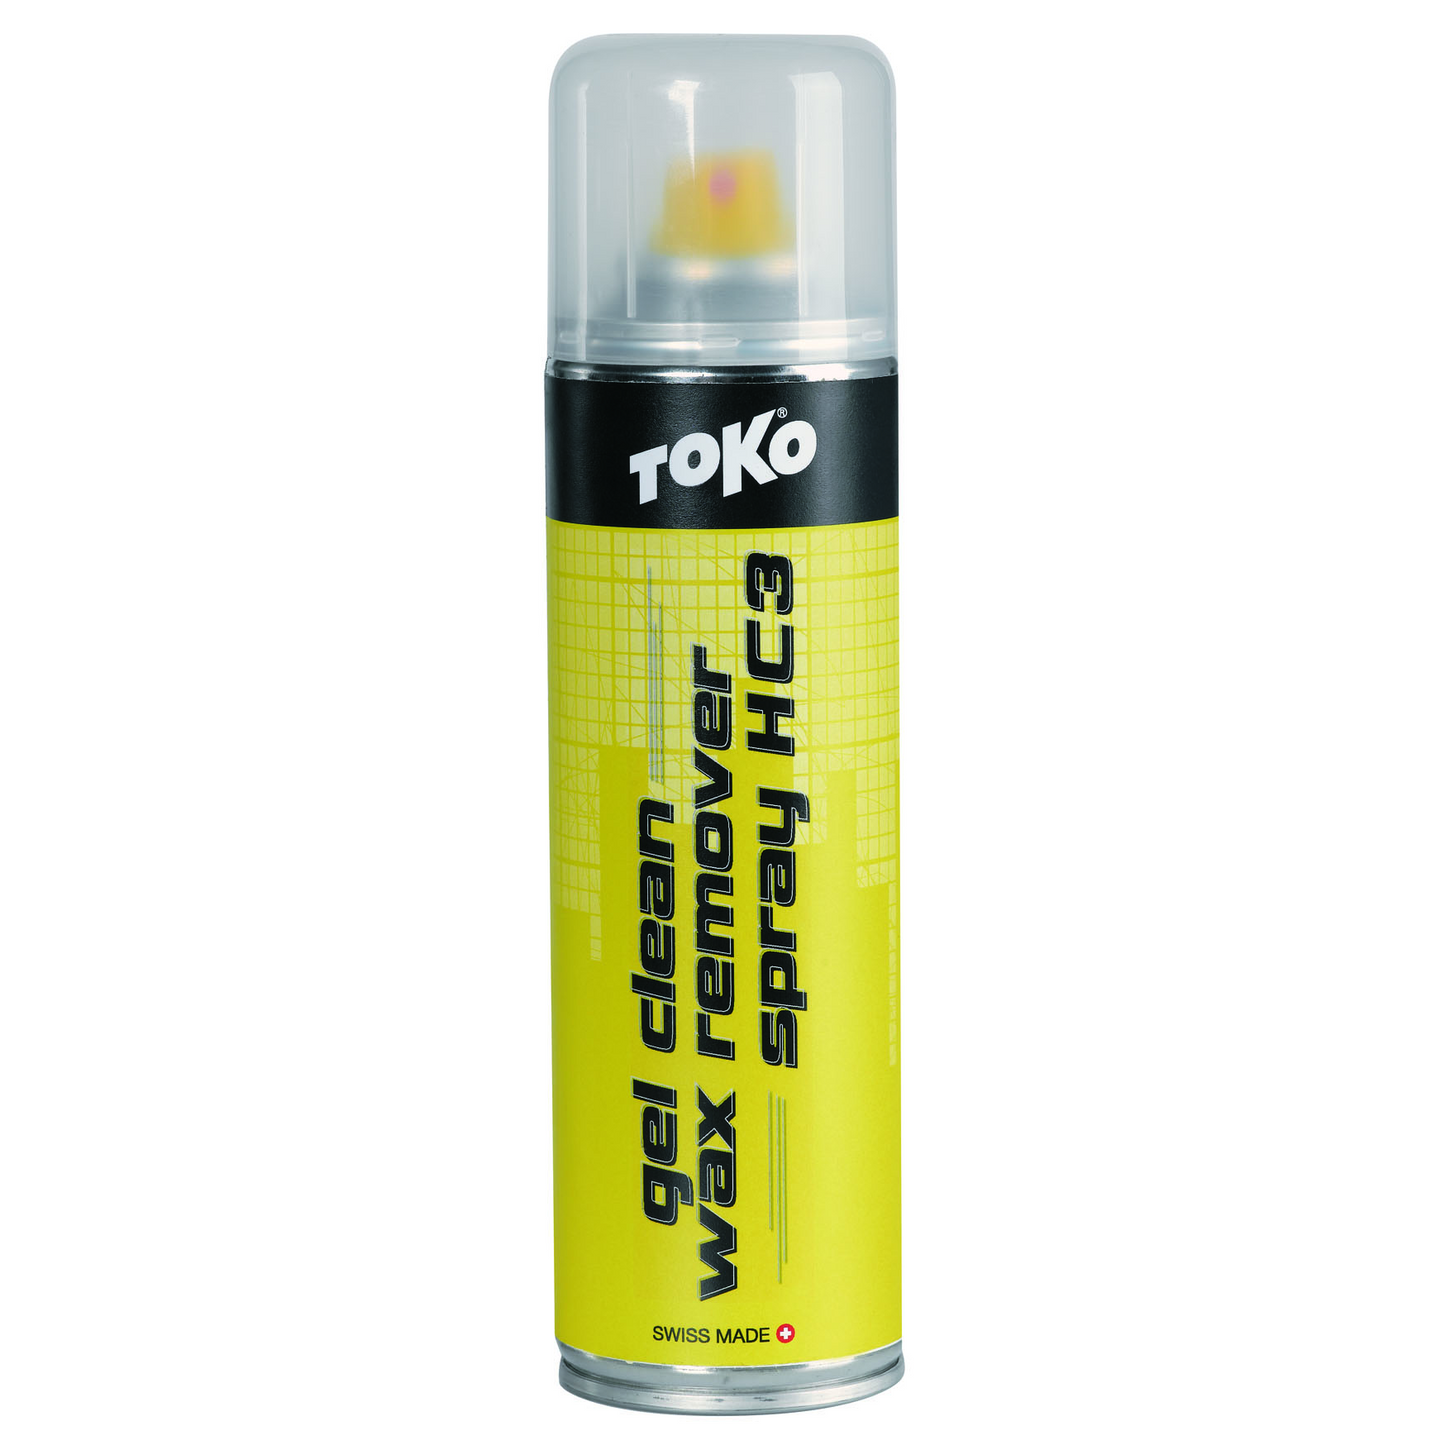 A product picture of the Toko Gel Clean Spray HC3